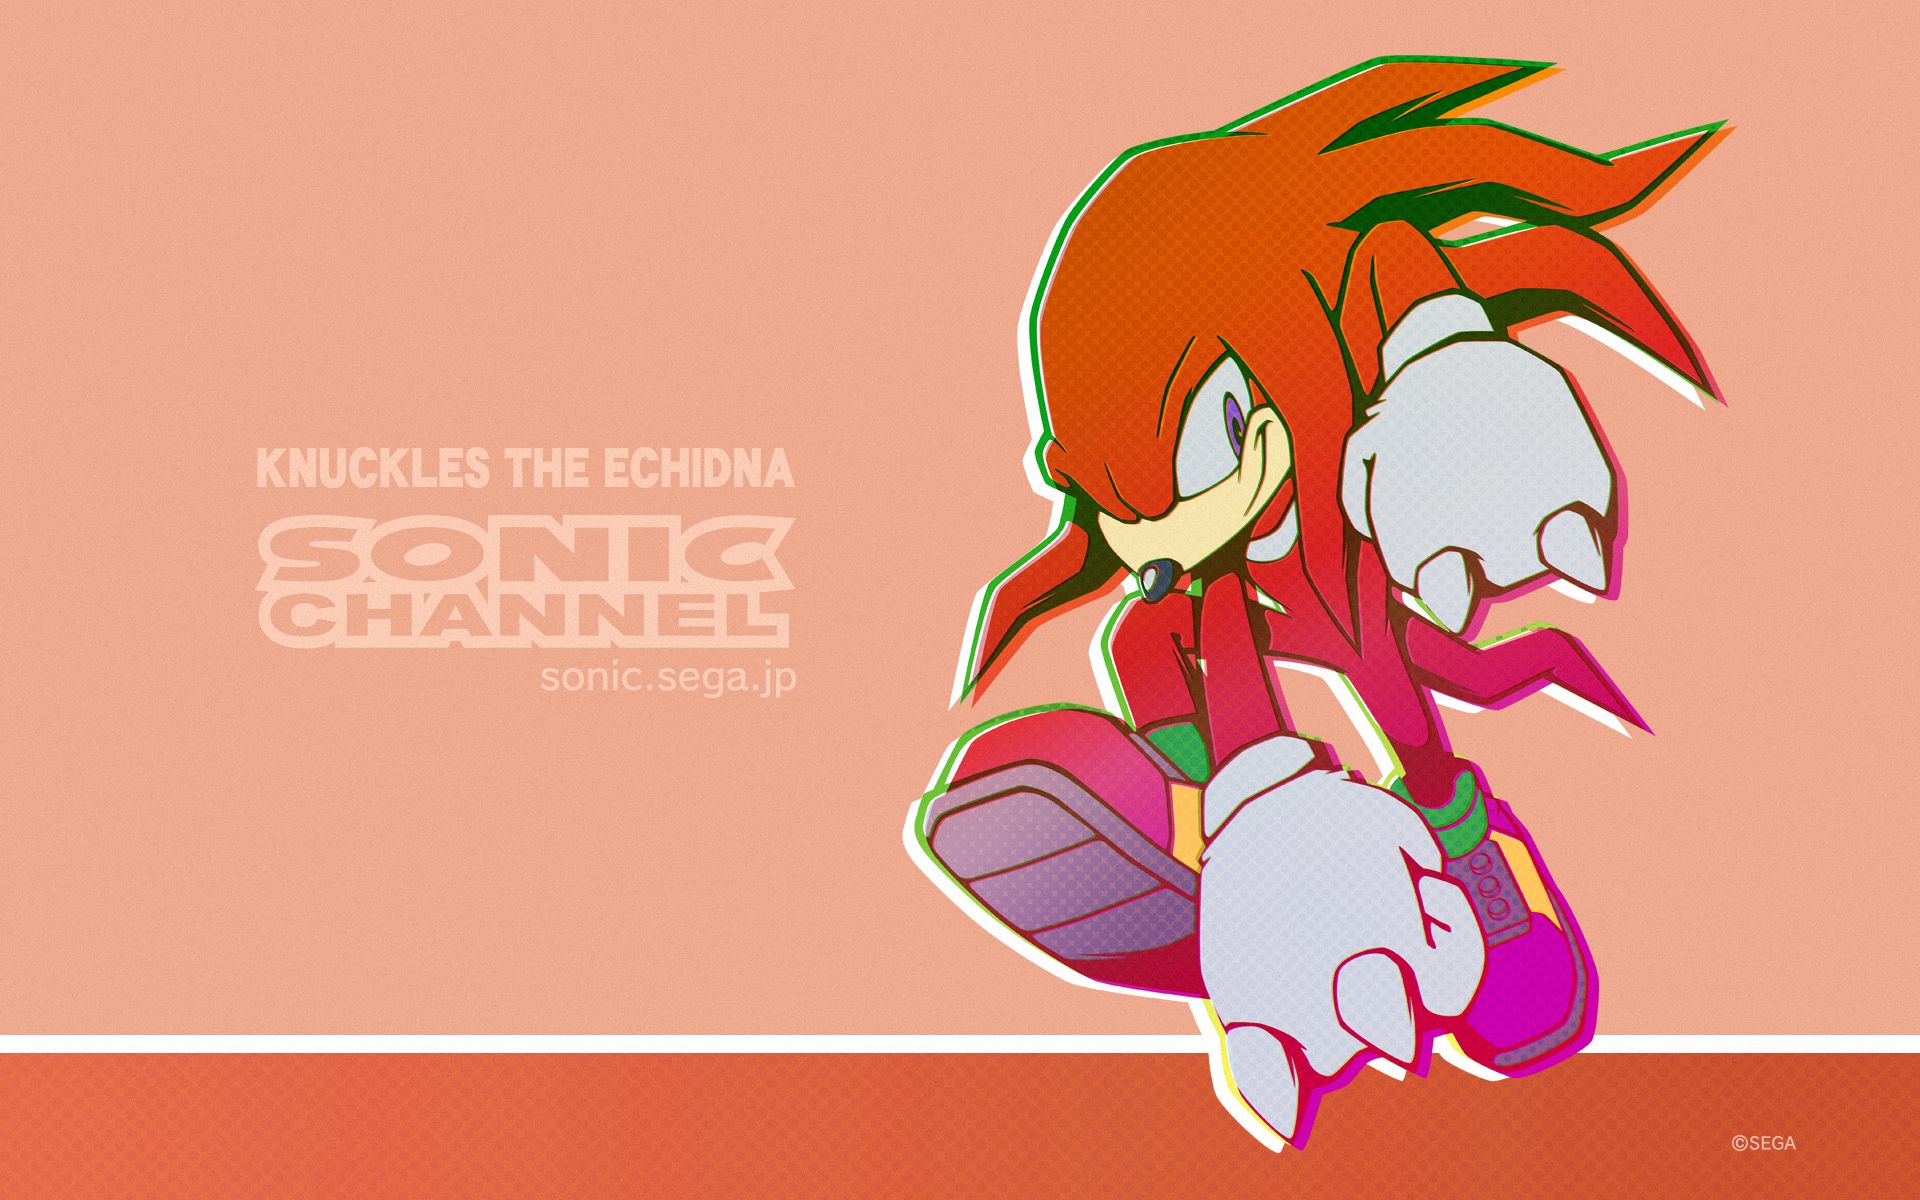 video game, sonic the hedgehog, knuckles the echidna, sonic channel, sonic